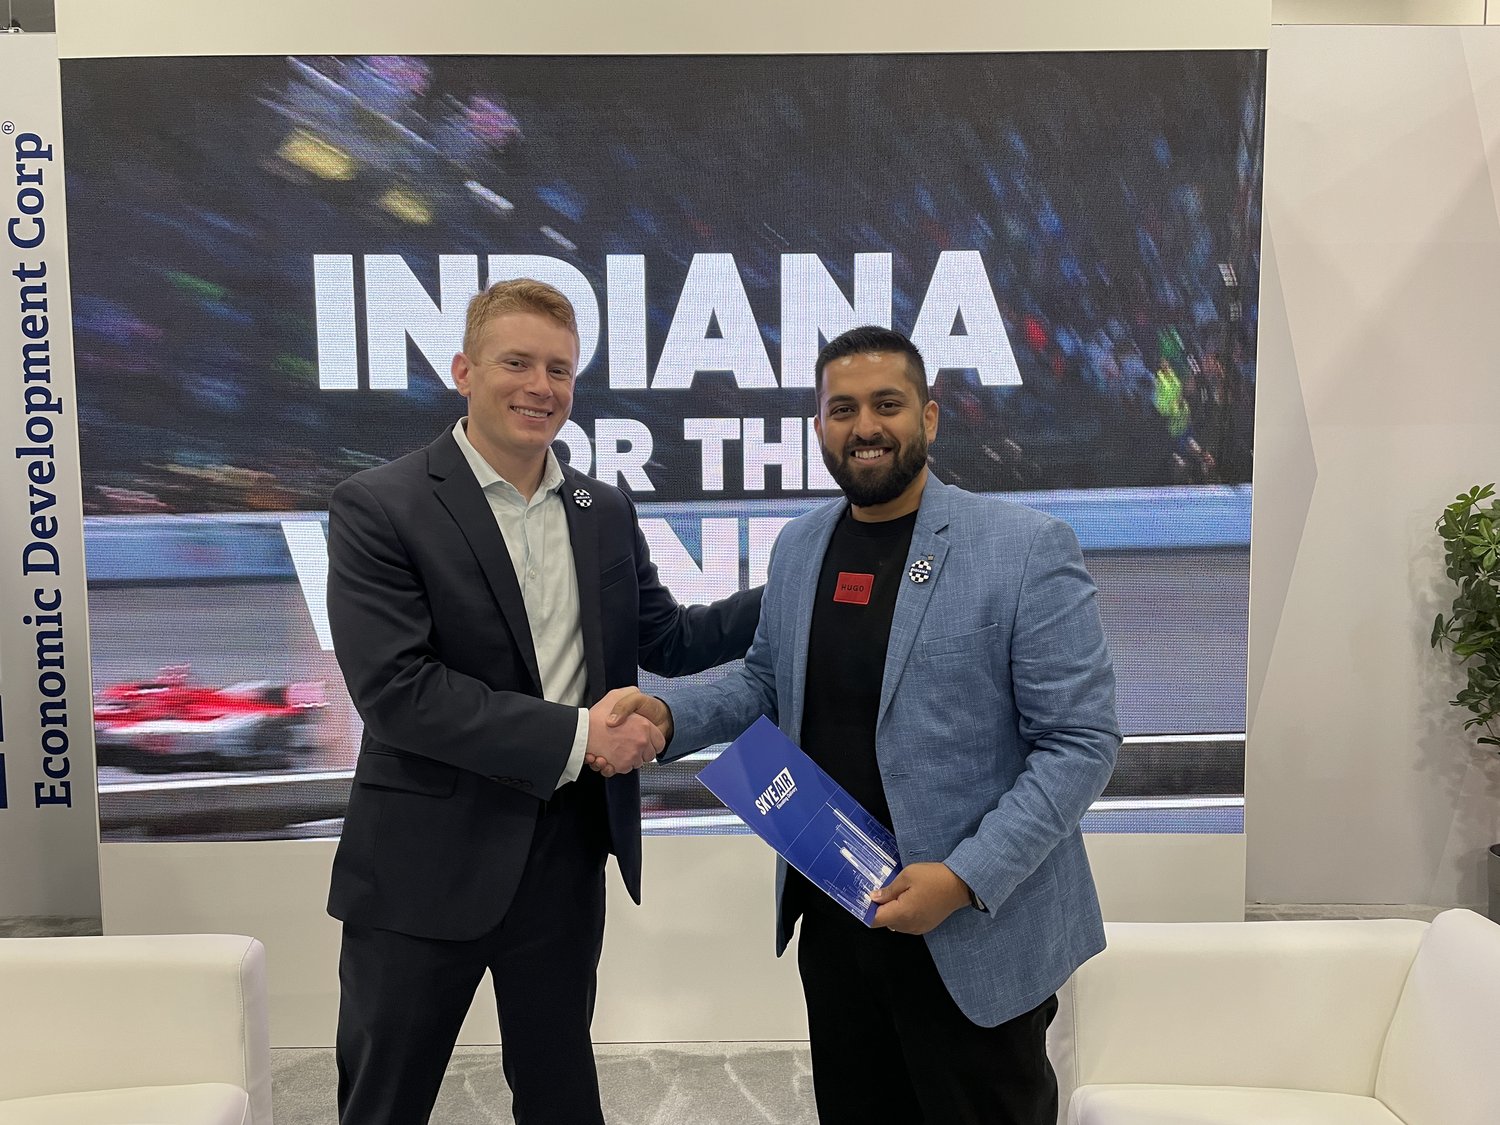 Aaron Pierce and Ankit Kumar pose for a photograph at the Indiana Economic Development Corporation's booth at CES in Las Vegas, NV.